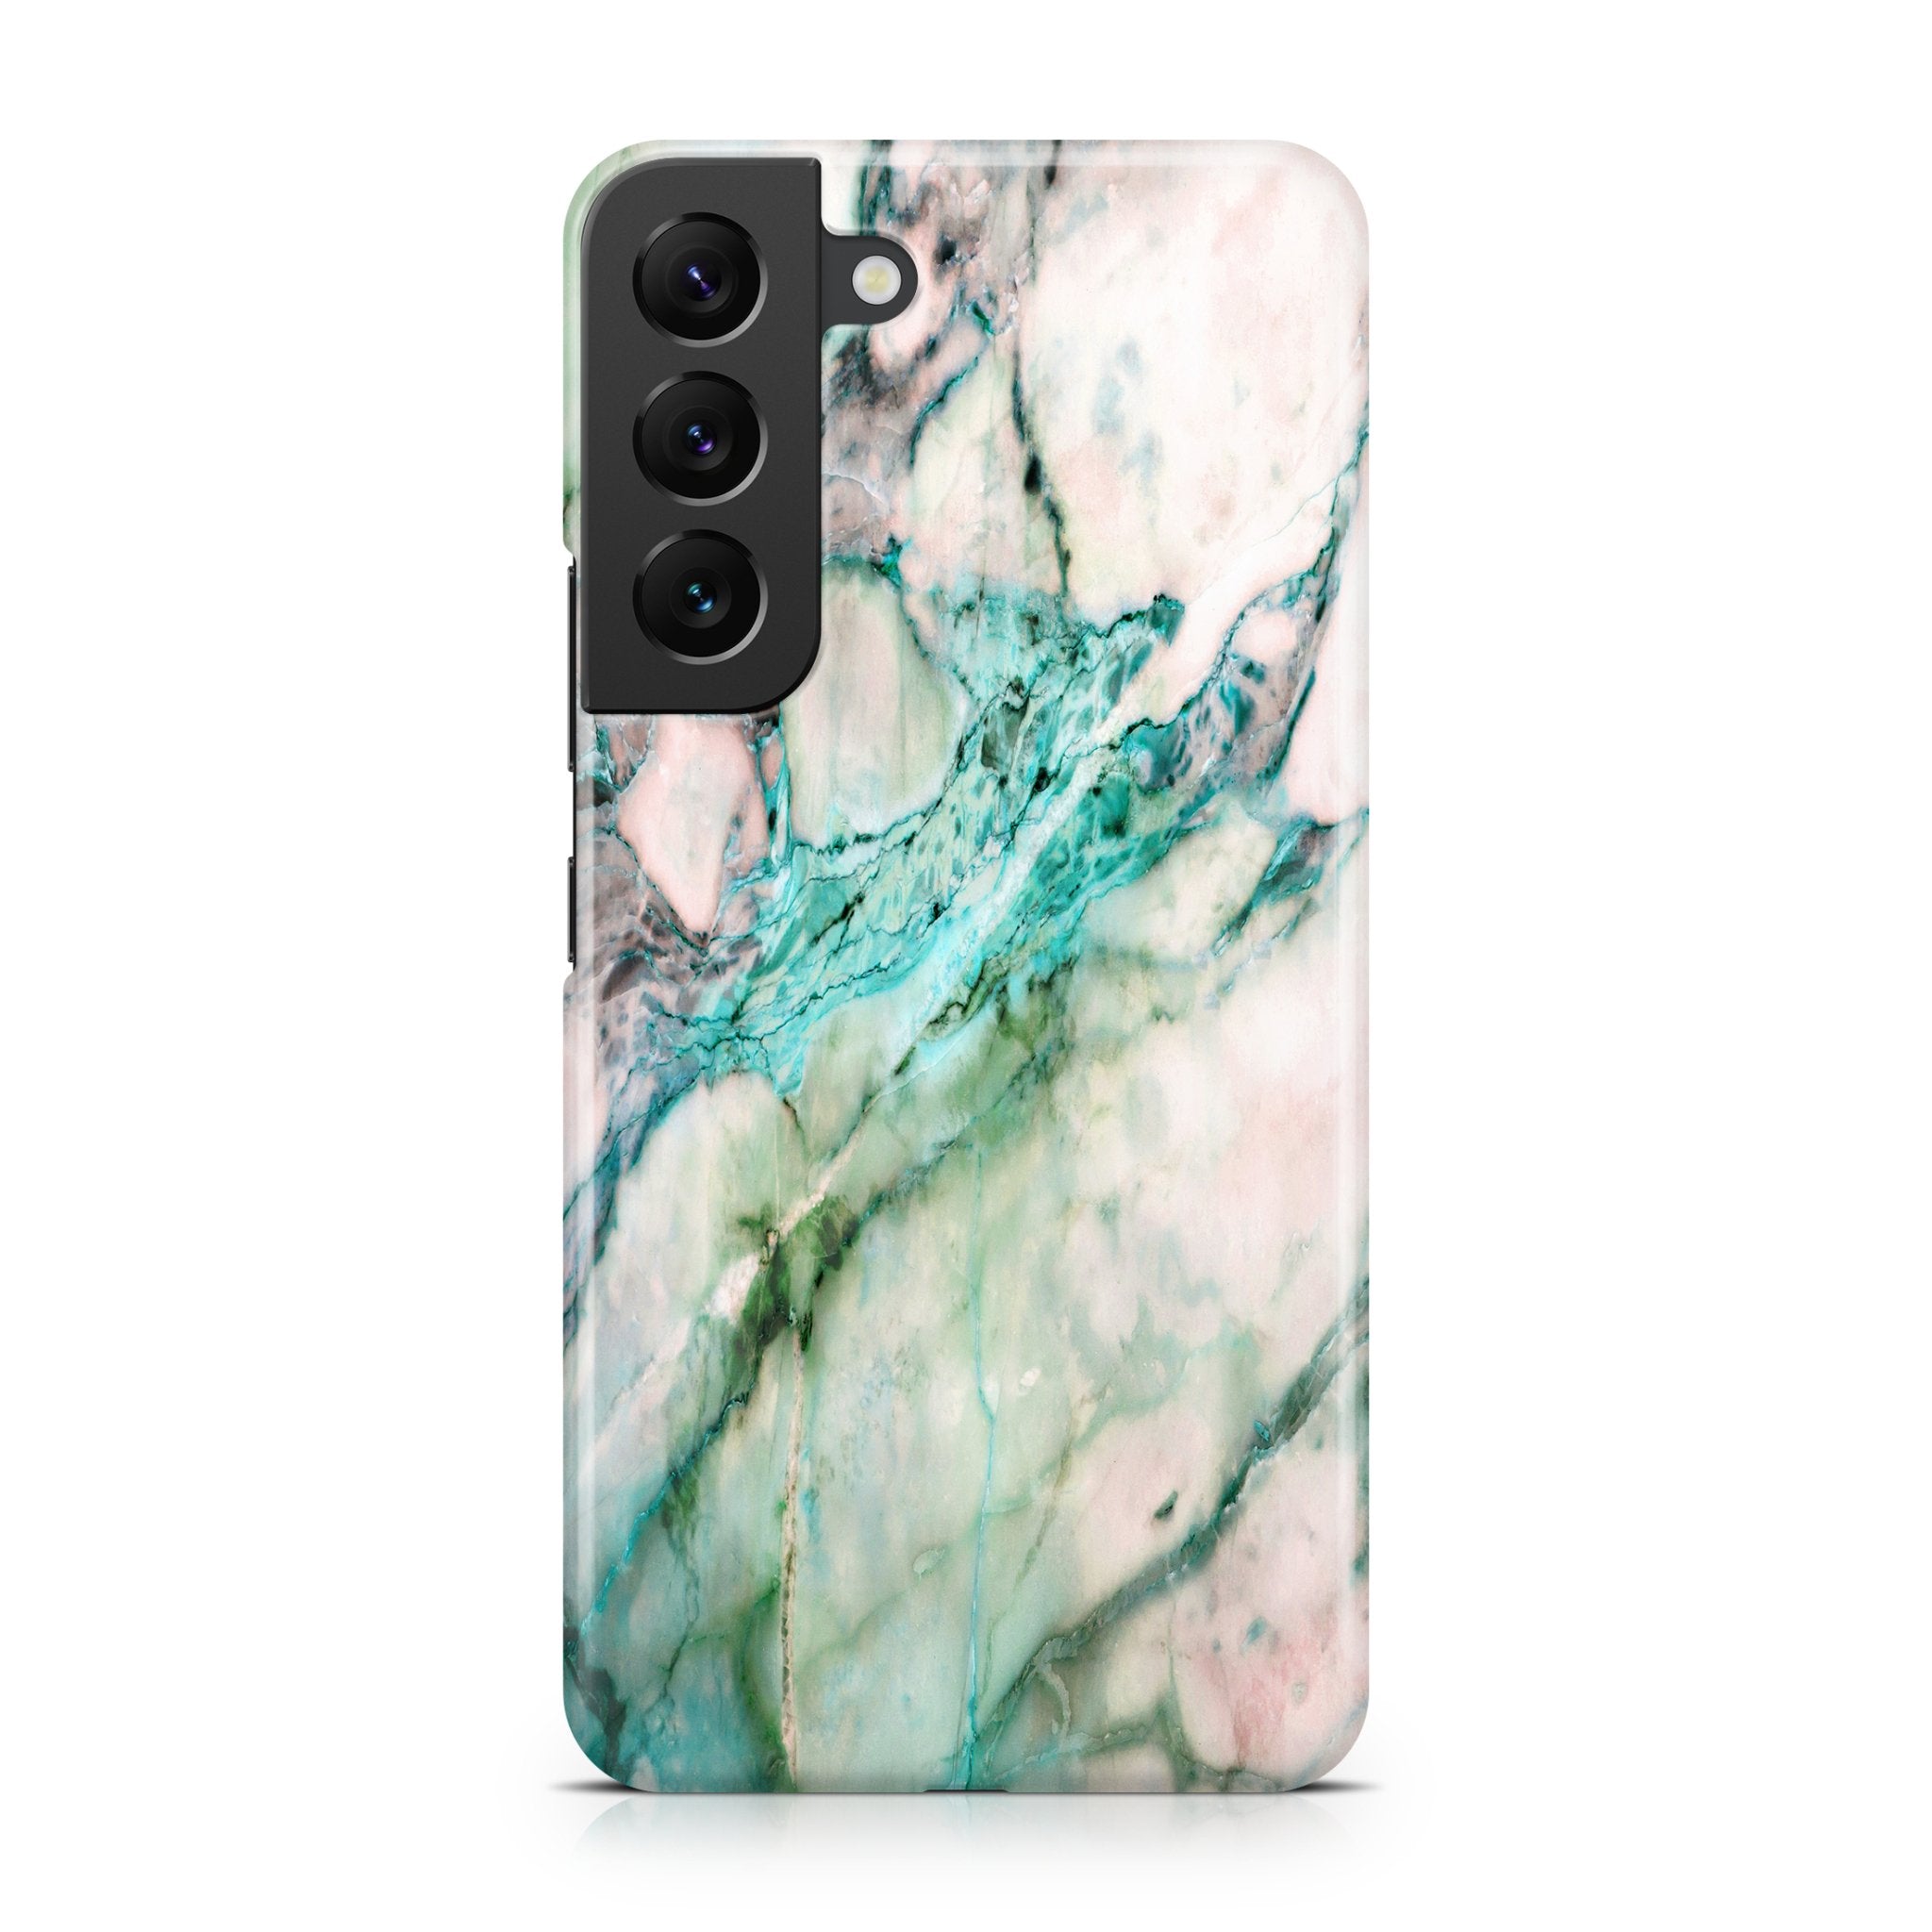 Turquoise Marble - Samsung phone case designs by CaseSwagger